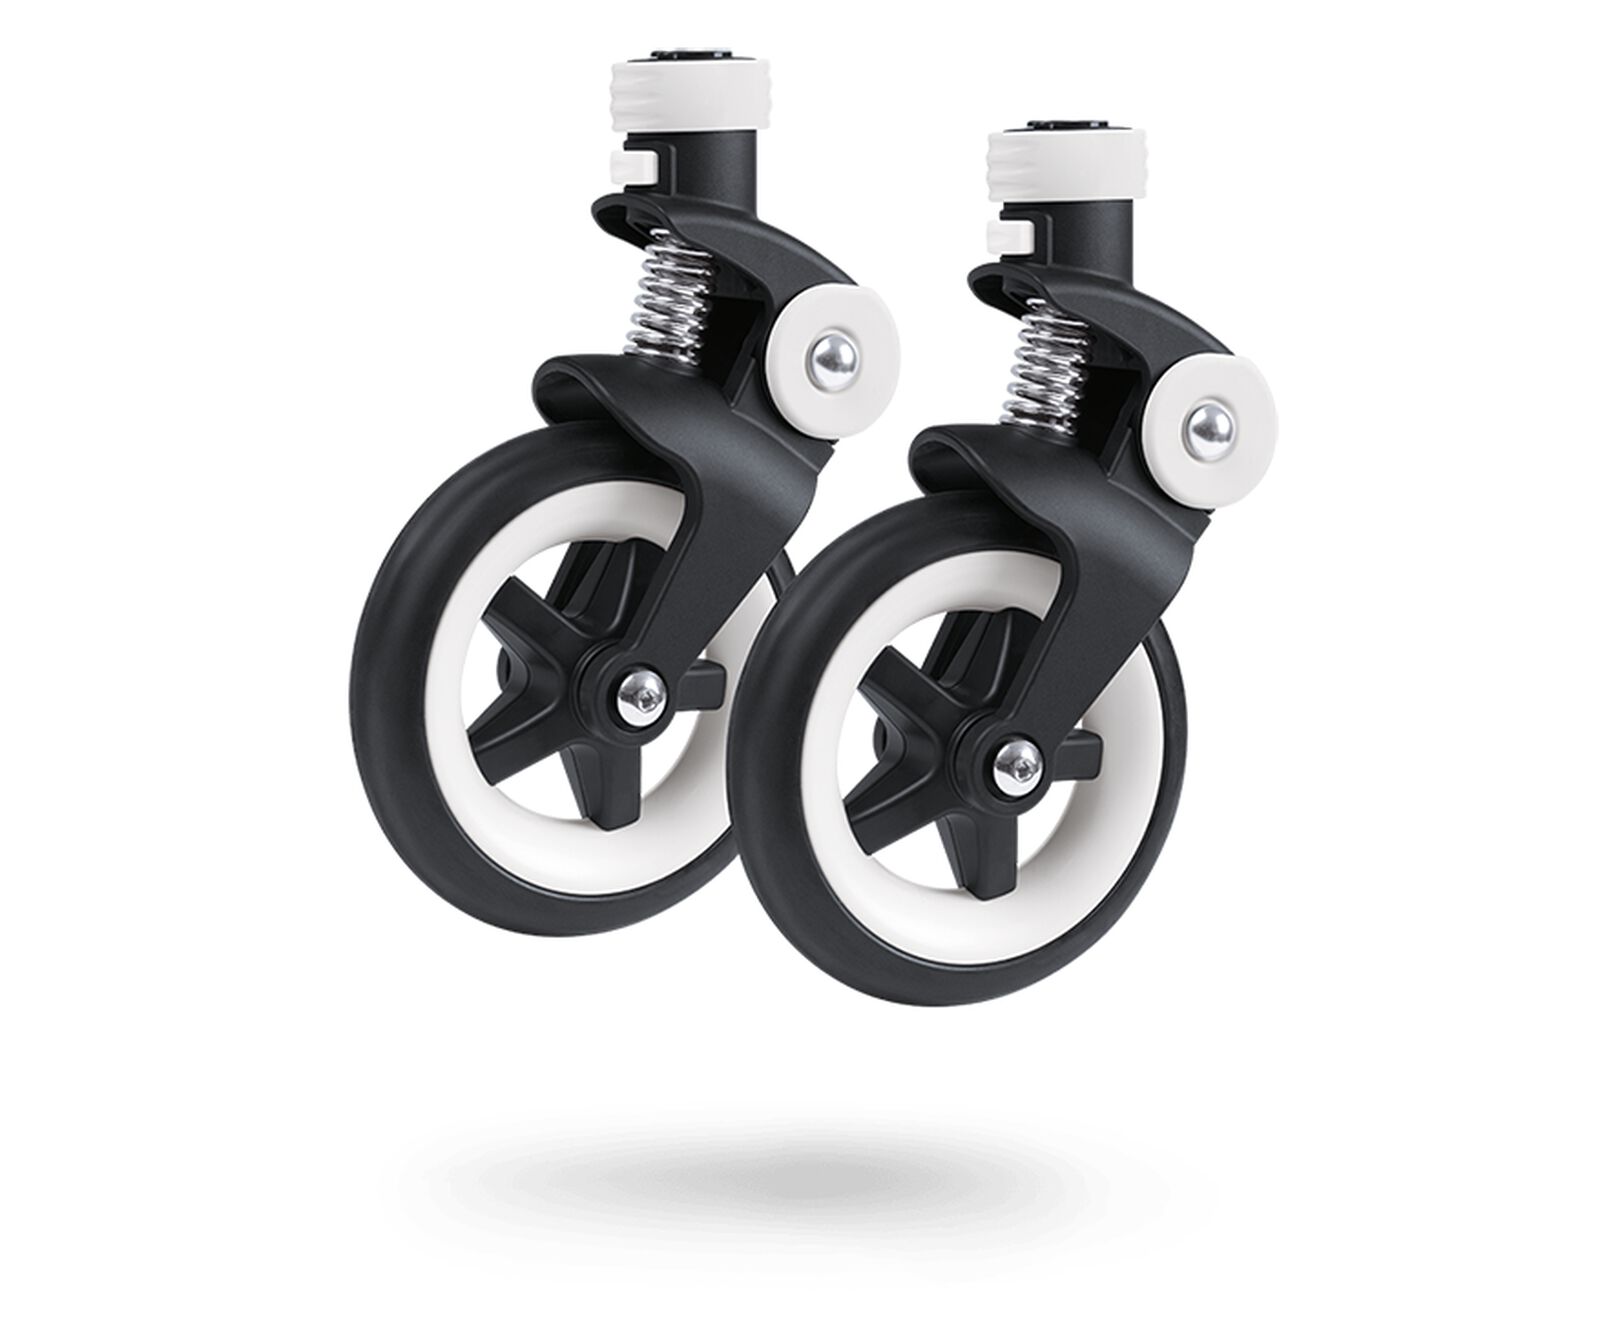 Bugaboo Bee 3 swivel wheels replacement set - View 1